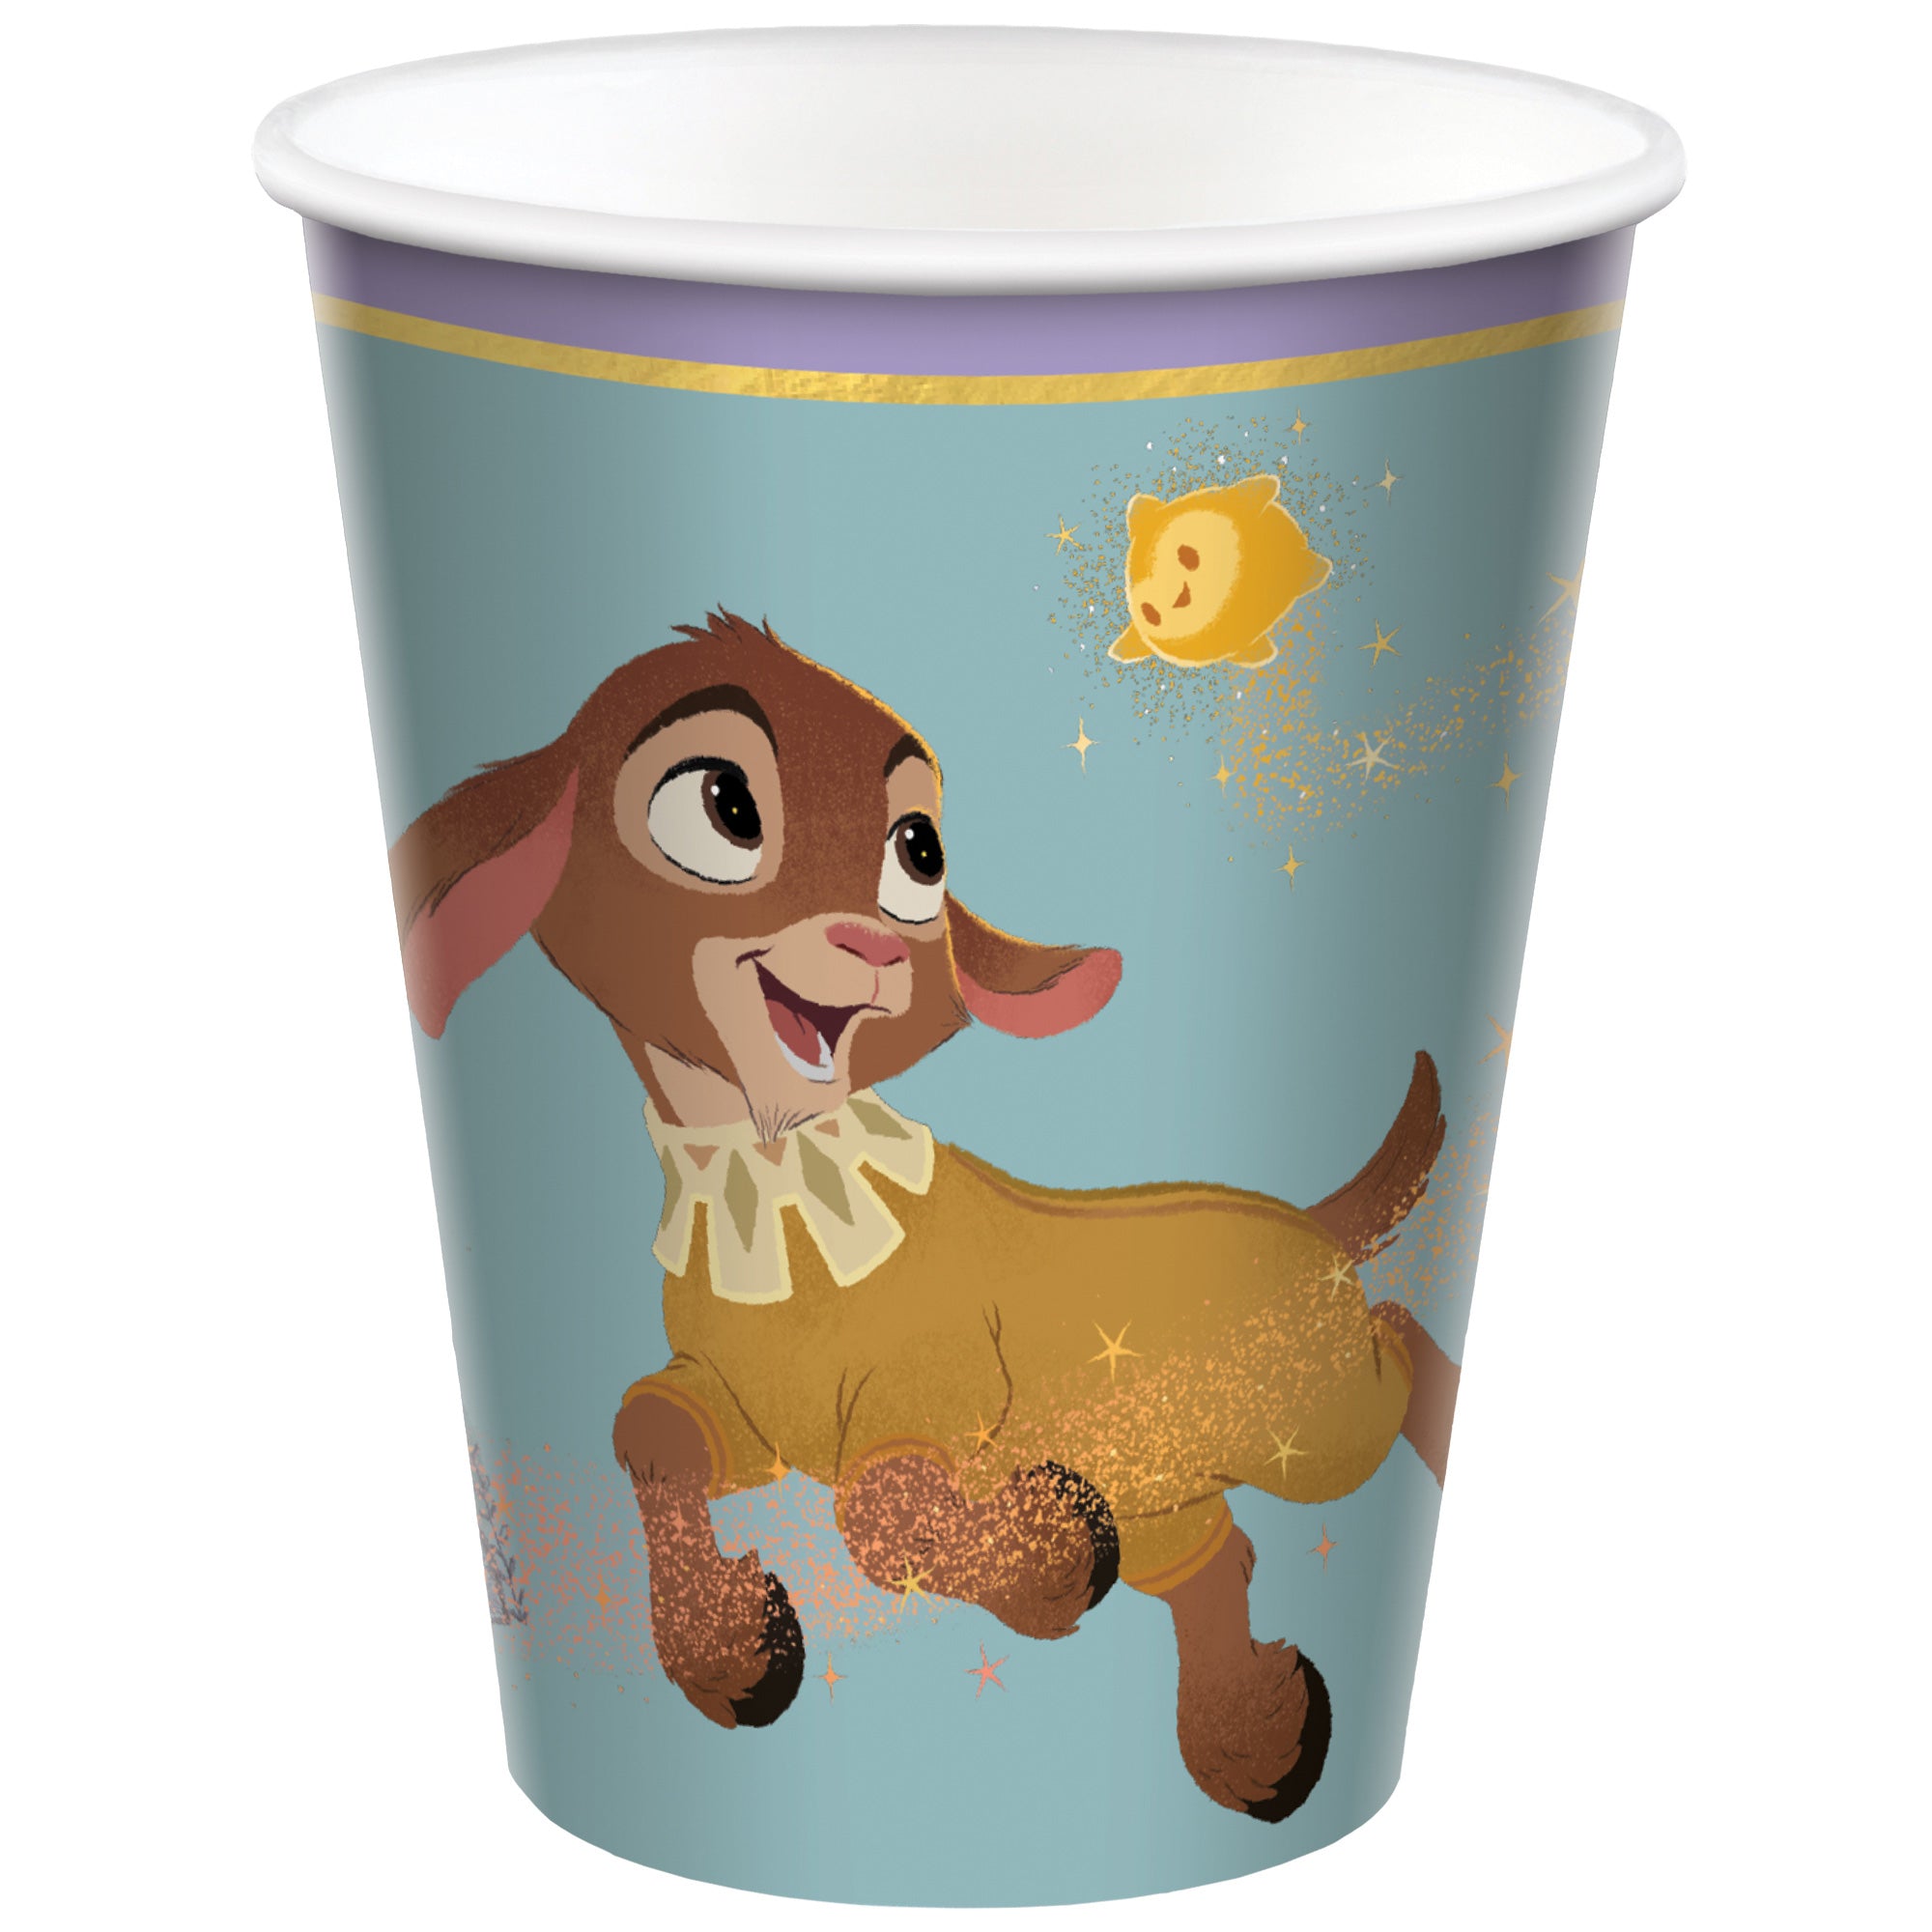 amscan 9915381-66 - Bluey Kids Birthday Party Paper Cups - 8 Pack